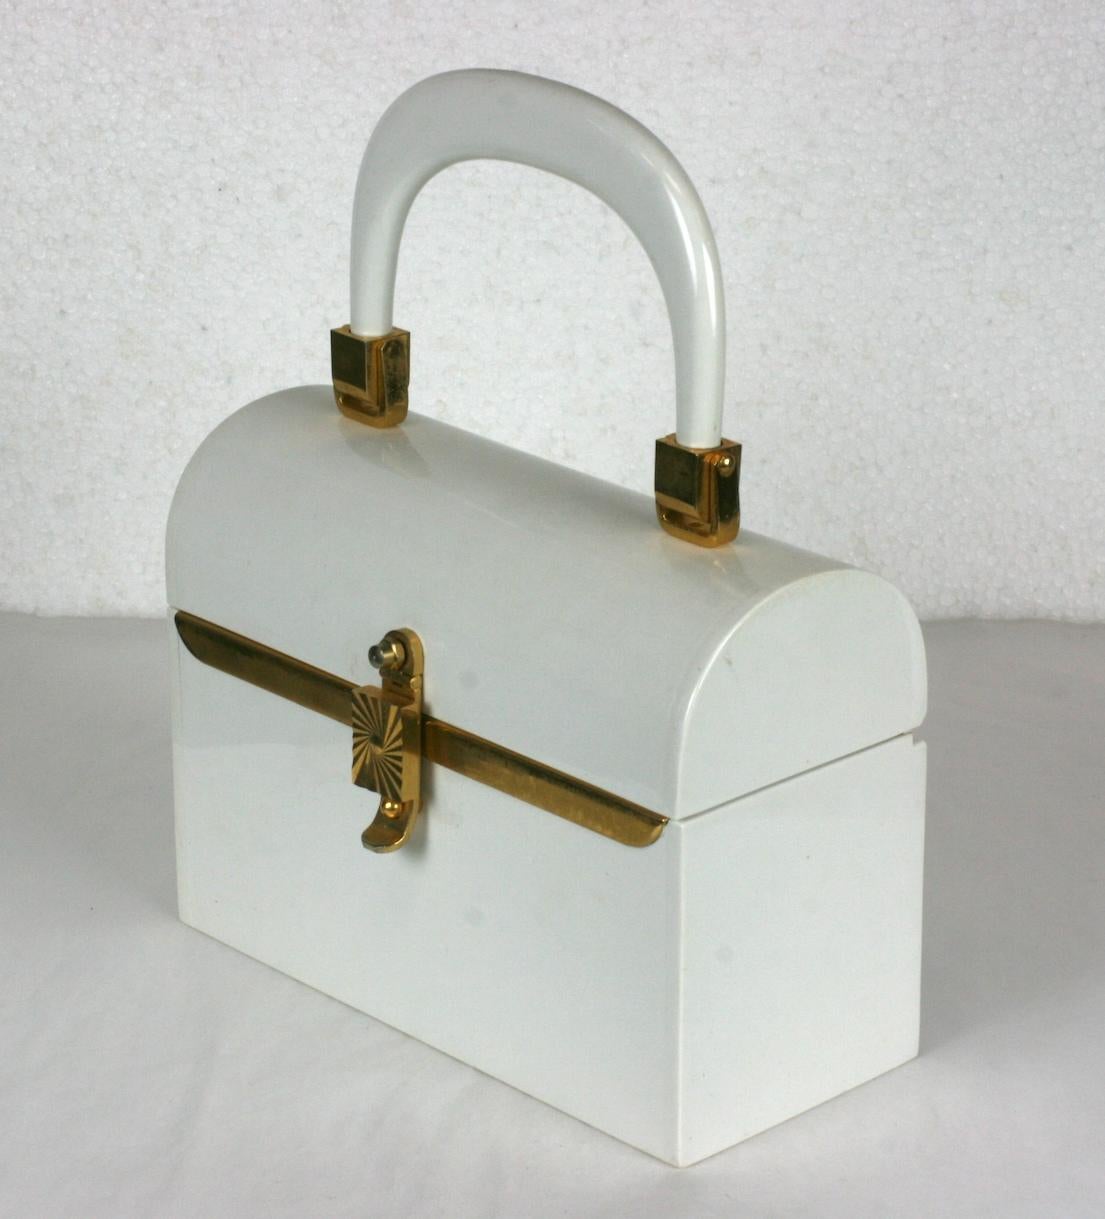 Miniature Mod 1960's Plastic Box Bag in chalk white with gilt accents. Hinged handles. 
6